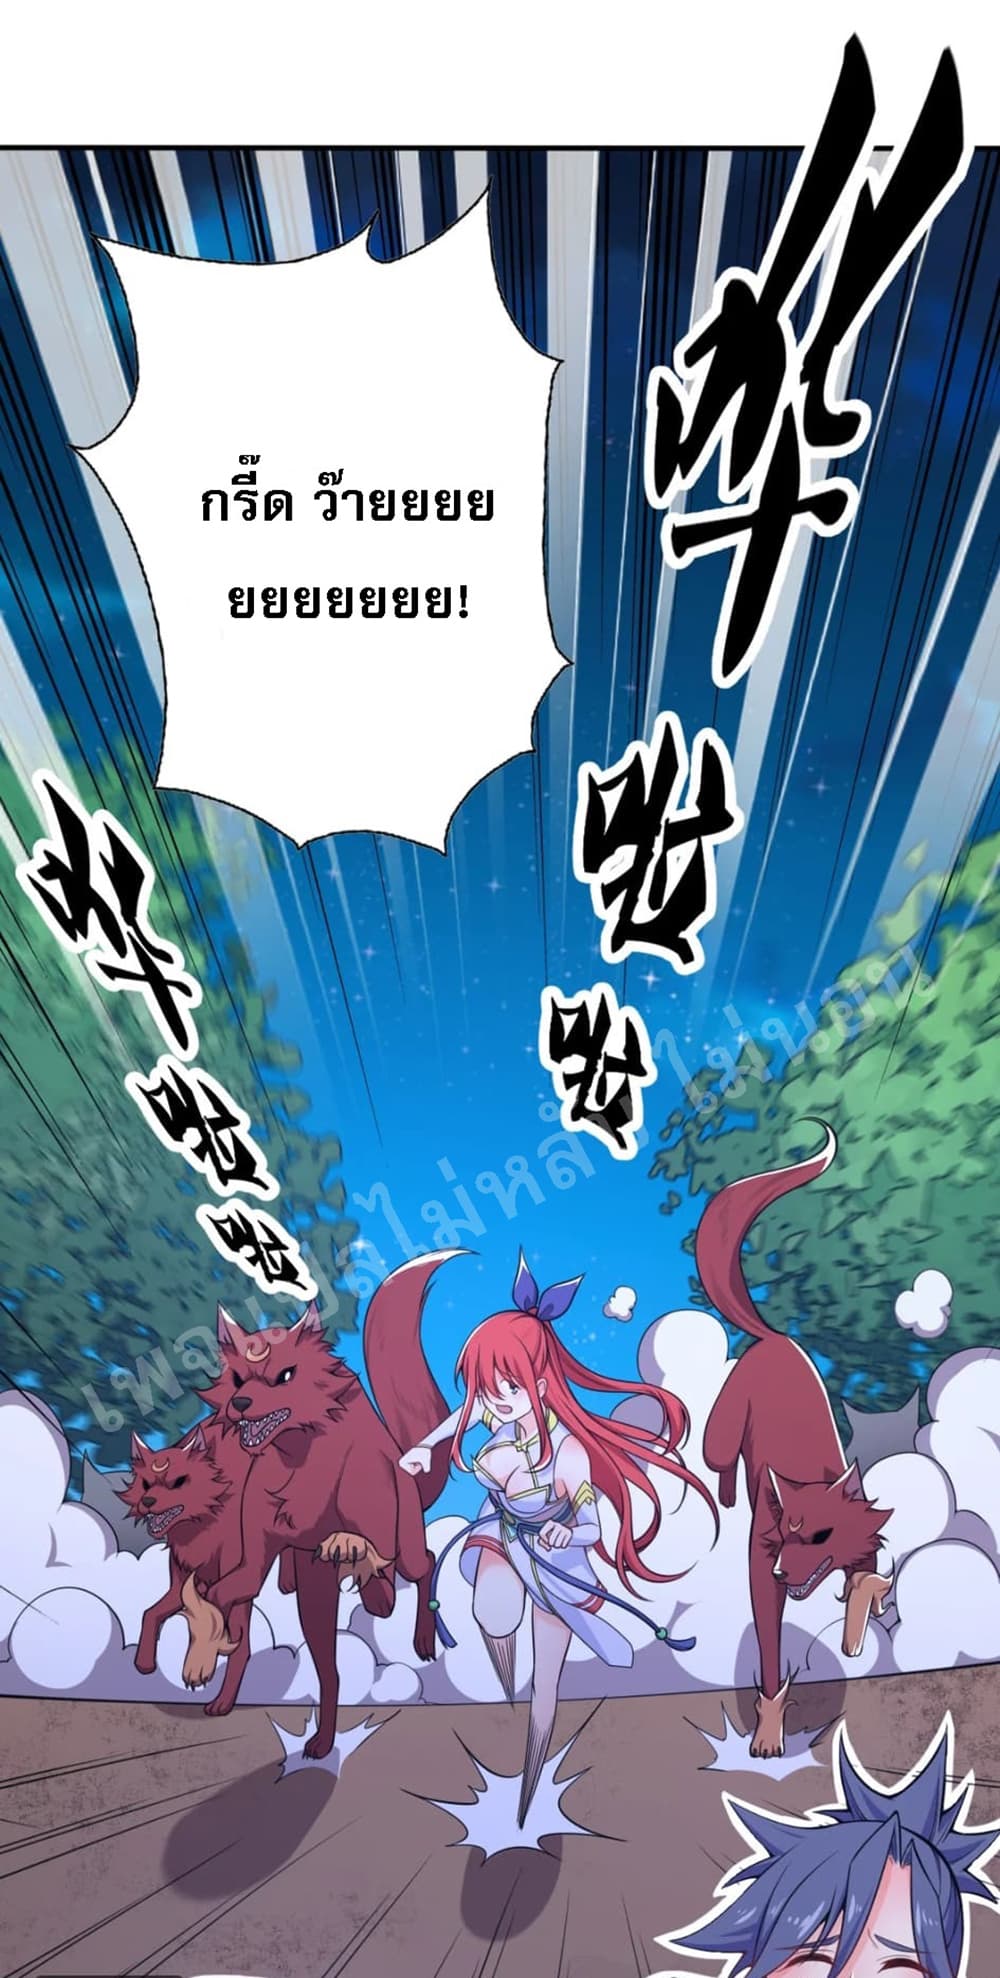 Rebirth as the Strongest Demon Lord 4 1 (21)